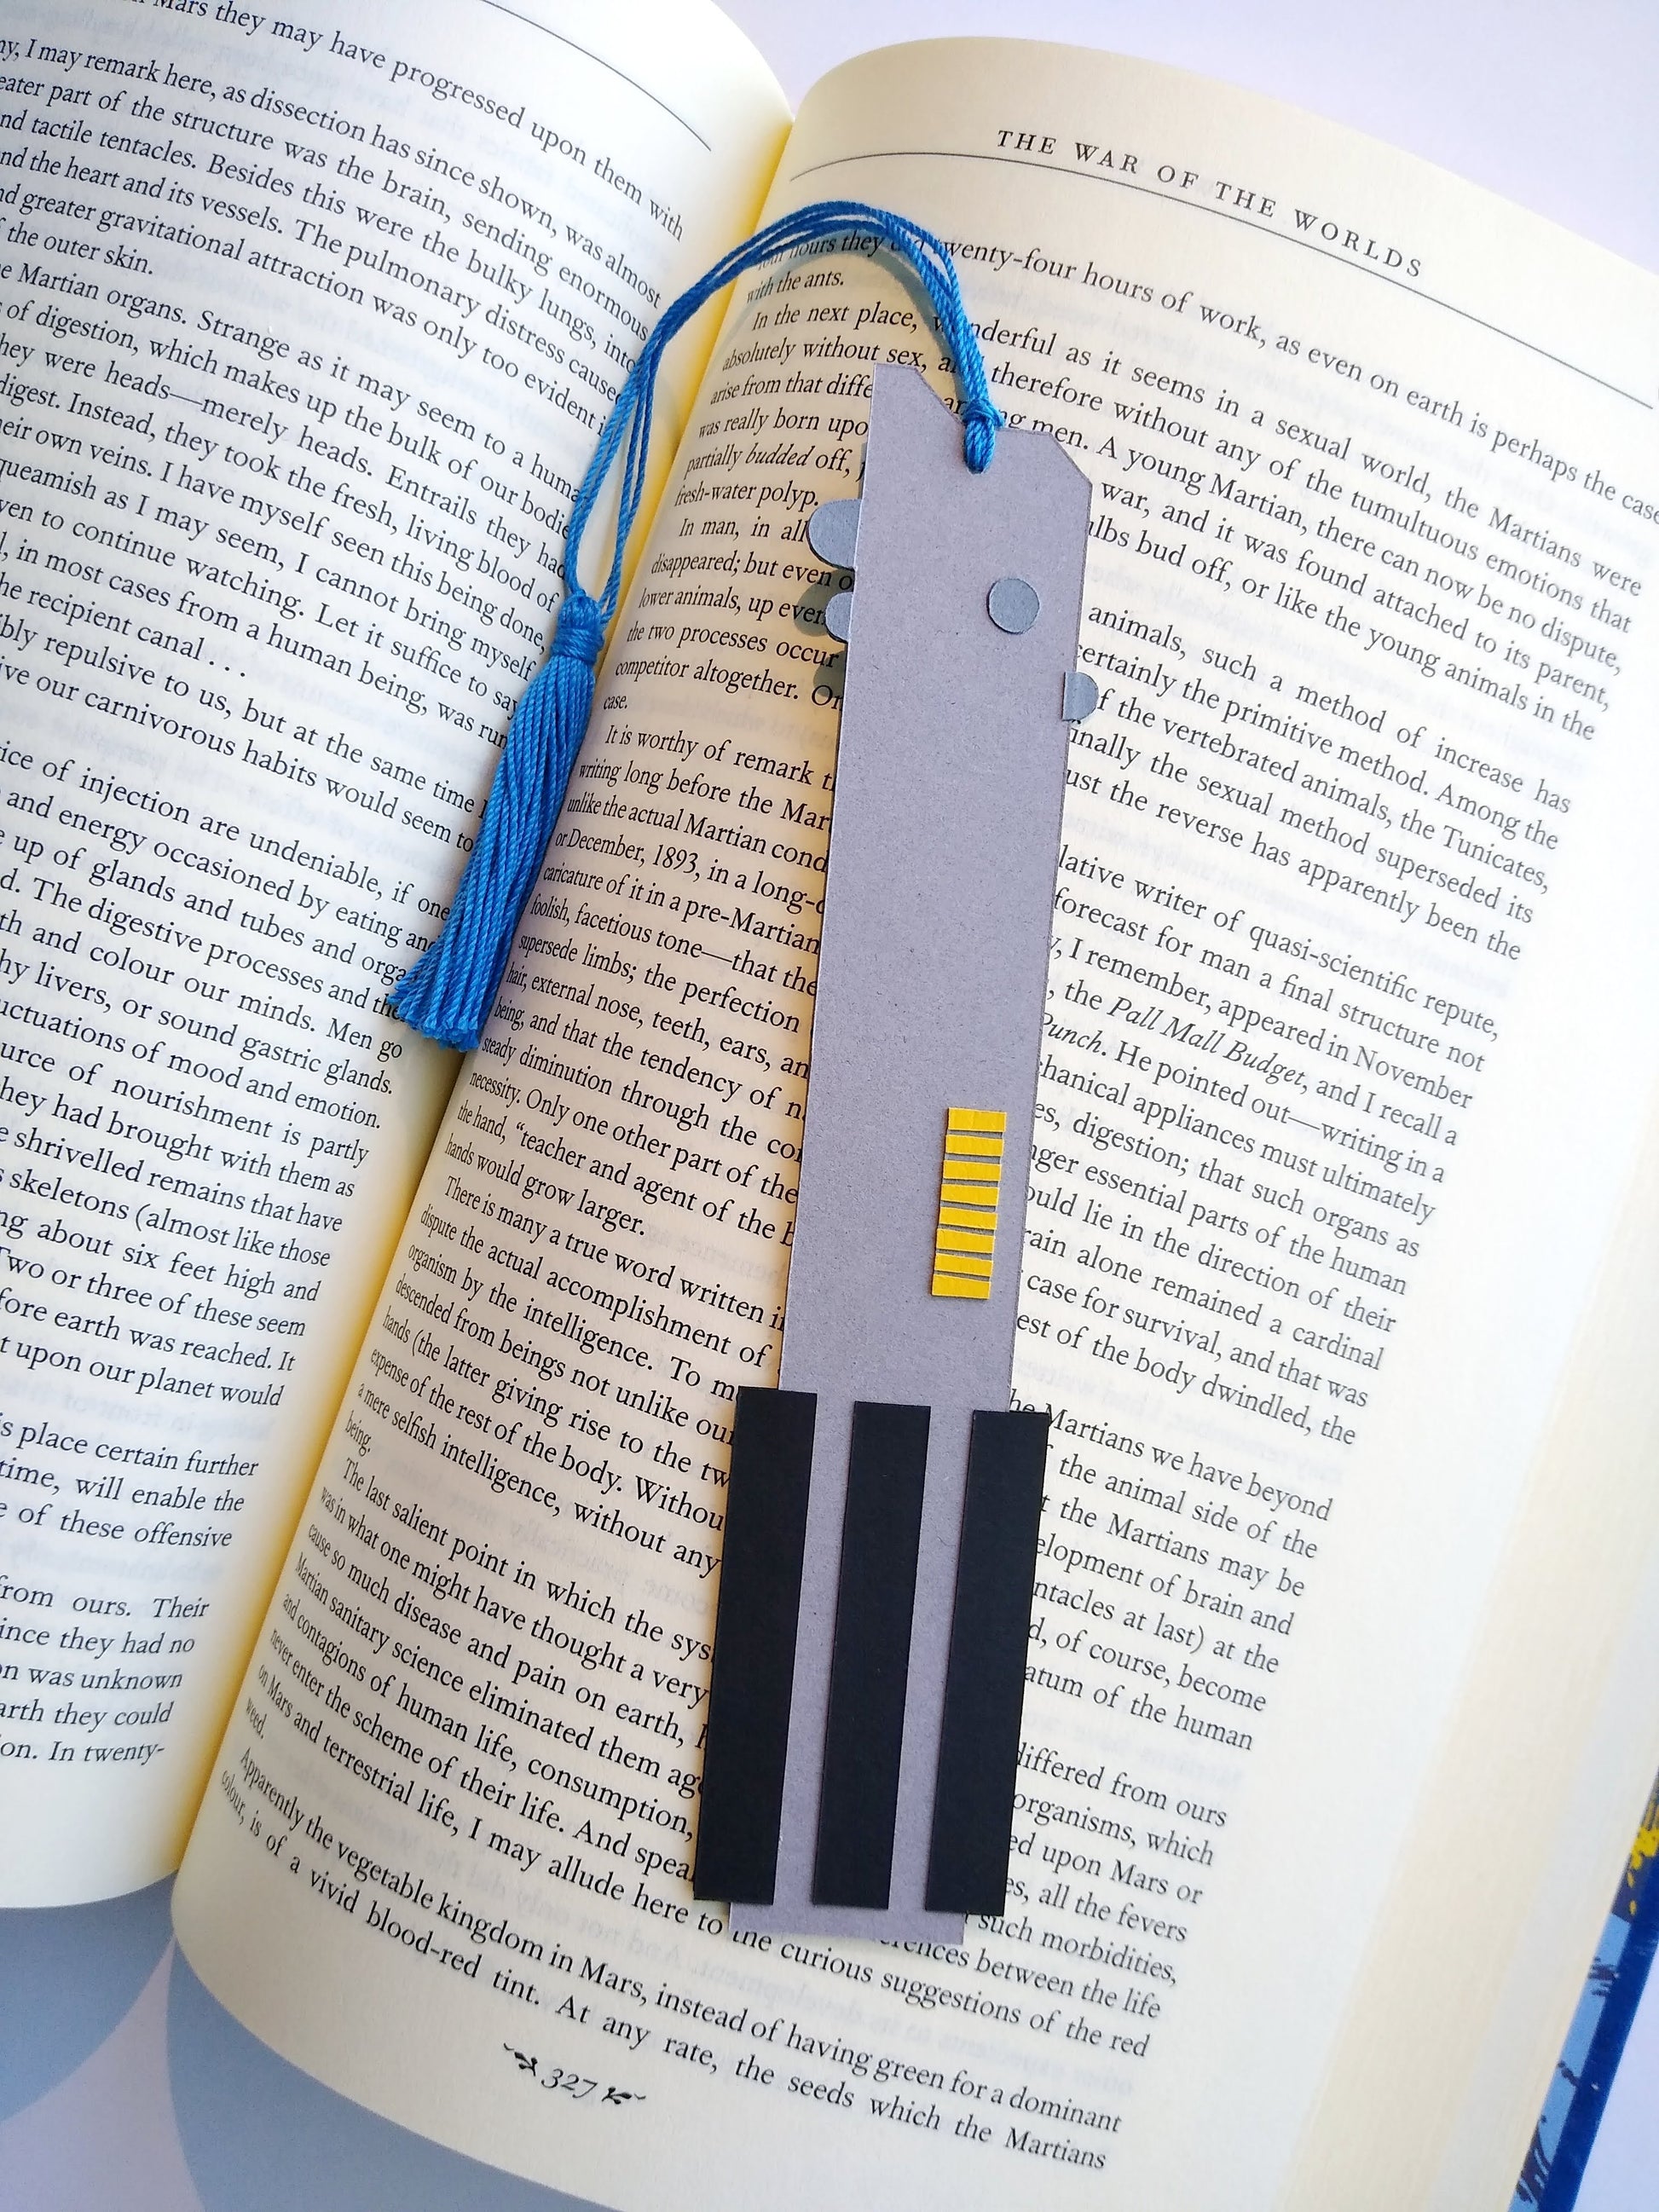 A bookmark designed like the handle of Anakin Skywalker's lightsaber rests on top of an open book. The blue tassel curls around and rests in dip between the pages.